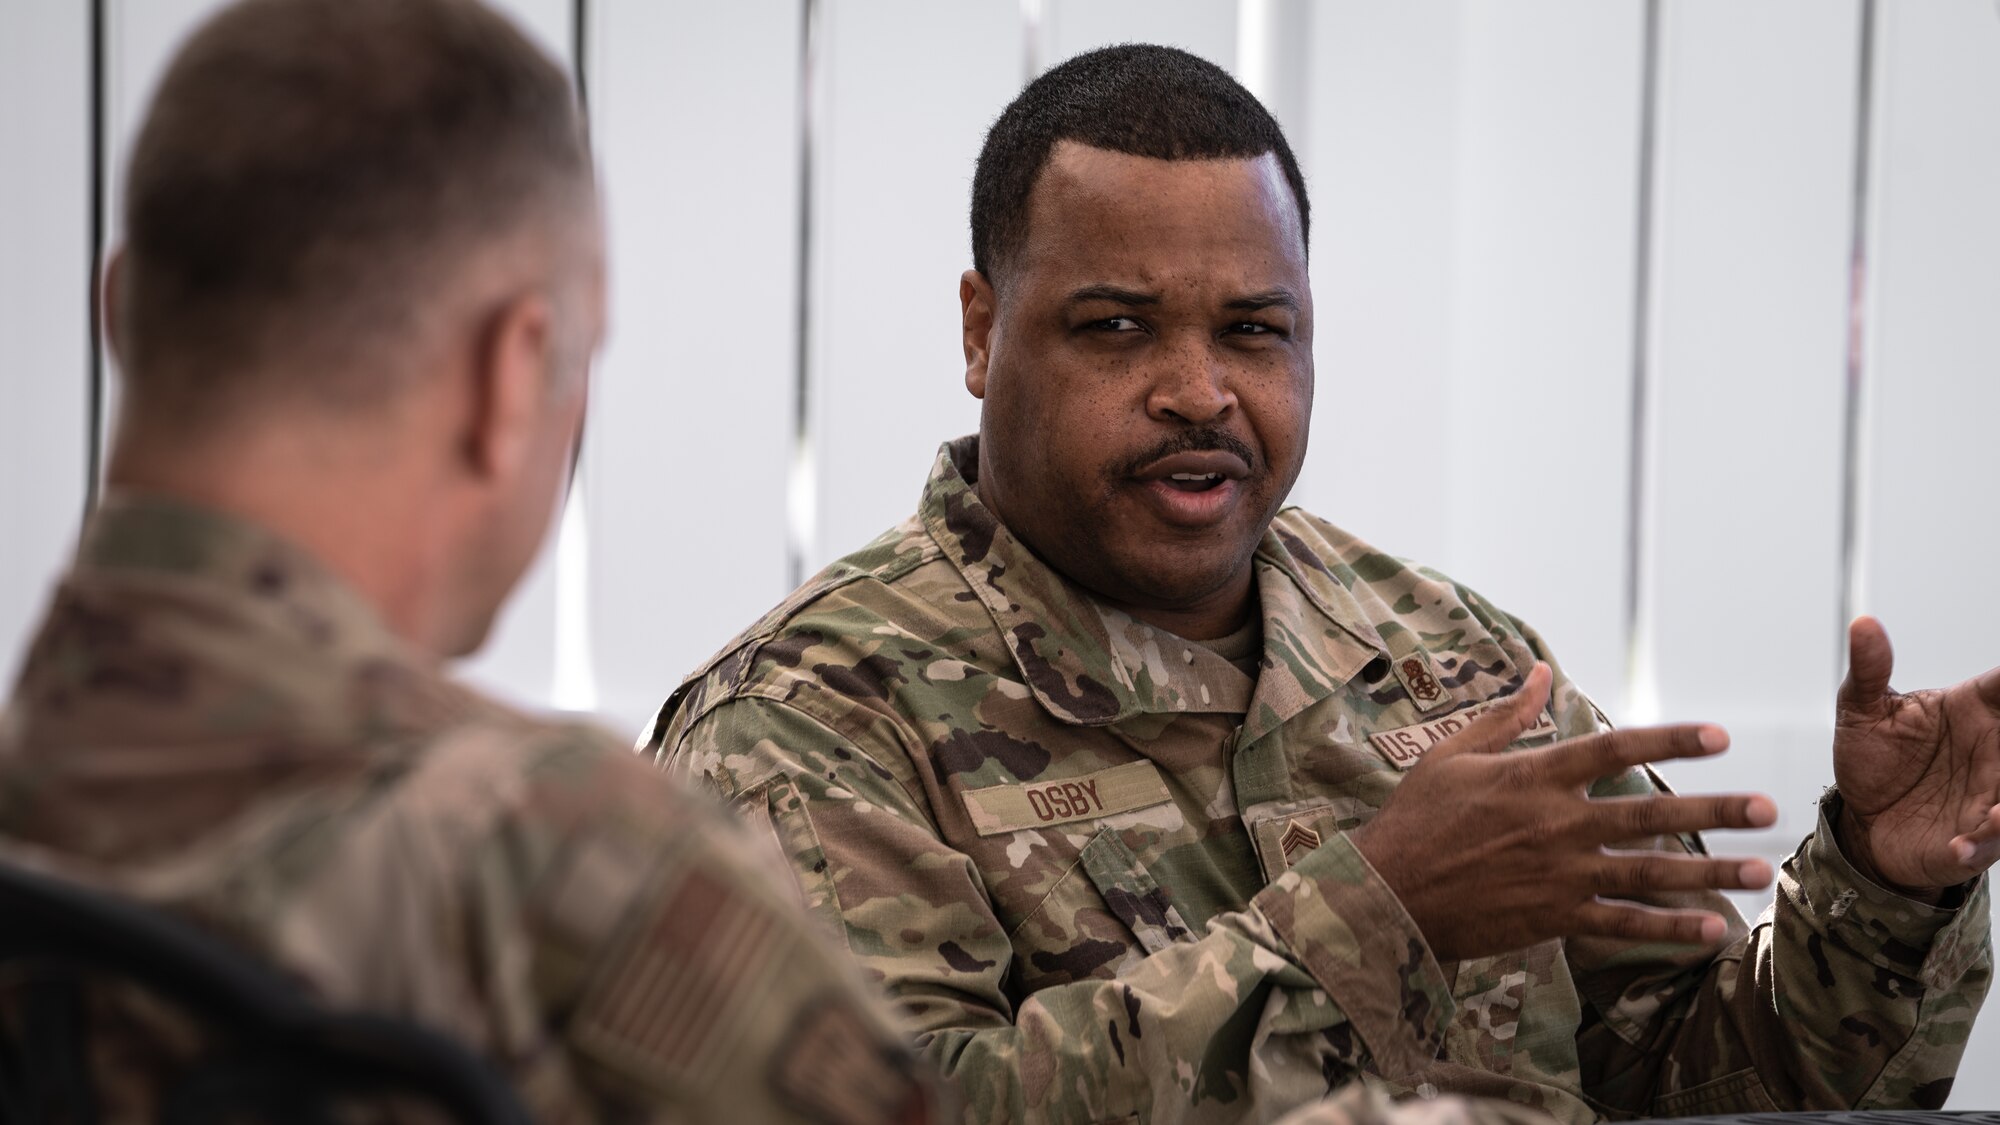 U.S. Air Force Col. Jason Loschinskey, 6th Mission Support Group commander, and U.S. Air Force Chief Master Sgt. Kevin Osby, Army and Air Force Exchange Service’s senior enlisted advisor, discuss the vision of the Exchange at MacDill Air Force Base, Florida, Feb. 22, 2022.